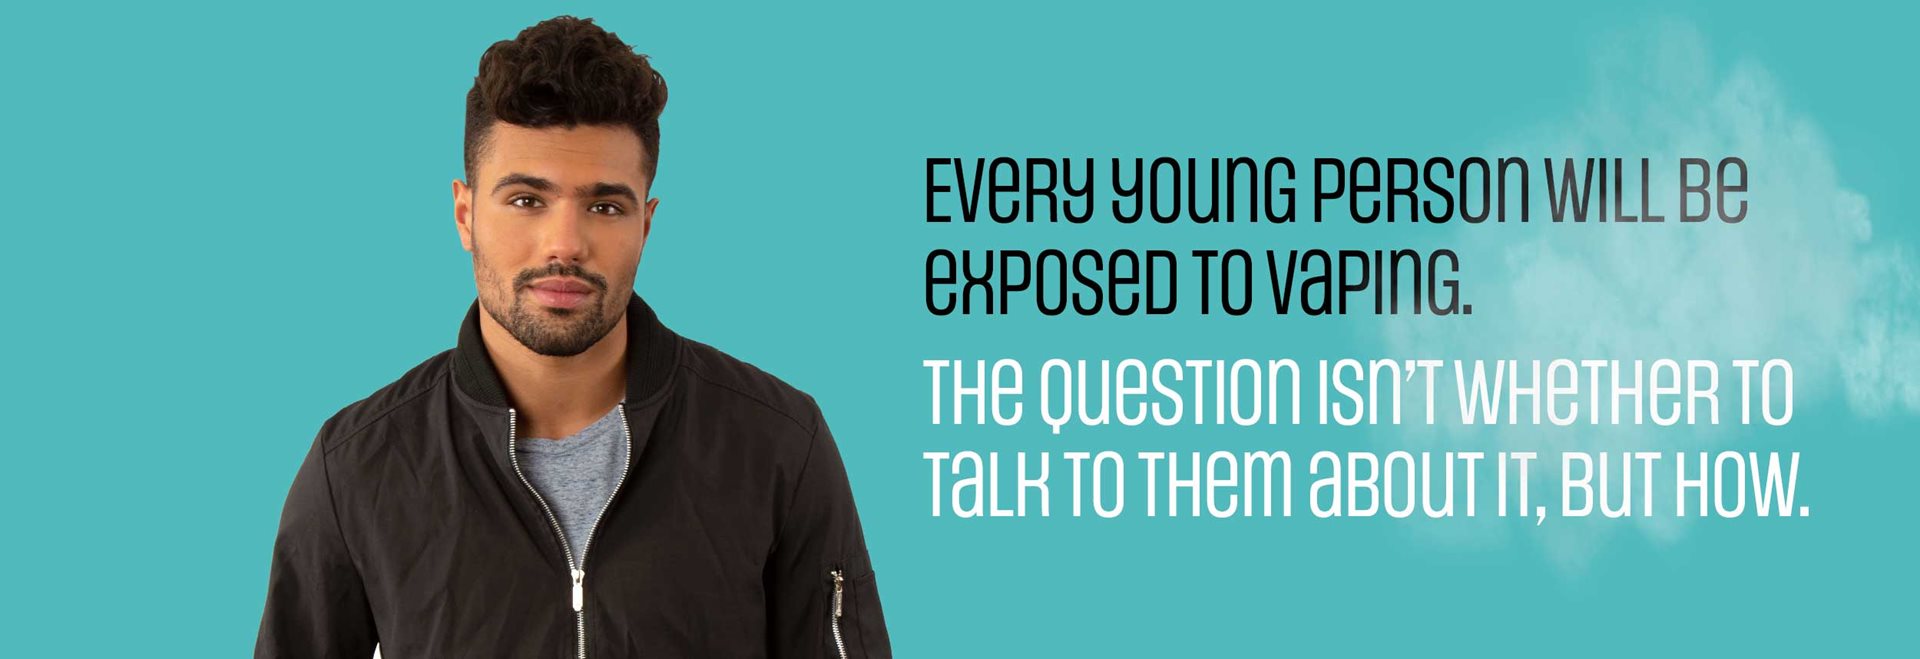 Every young person will be exposed to vaping. The question isn't whether to talk to them about it, but how.